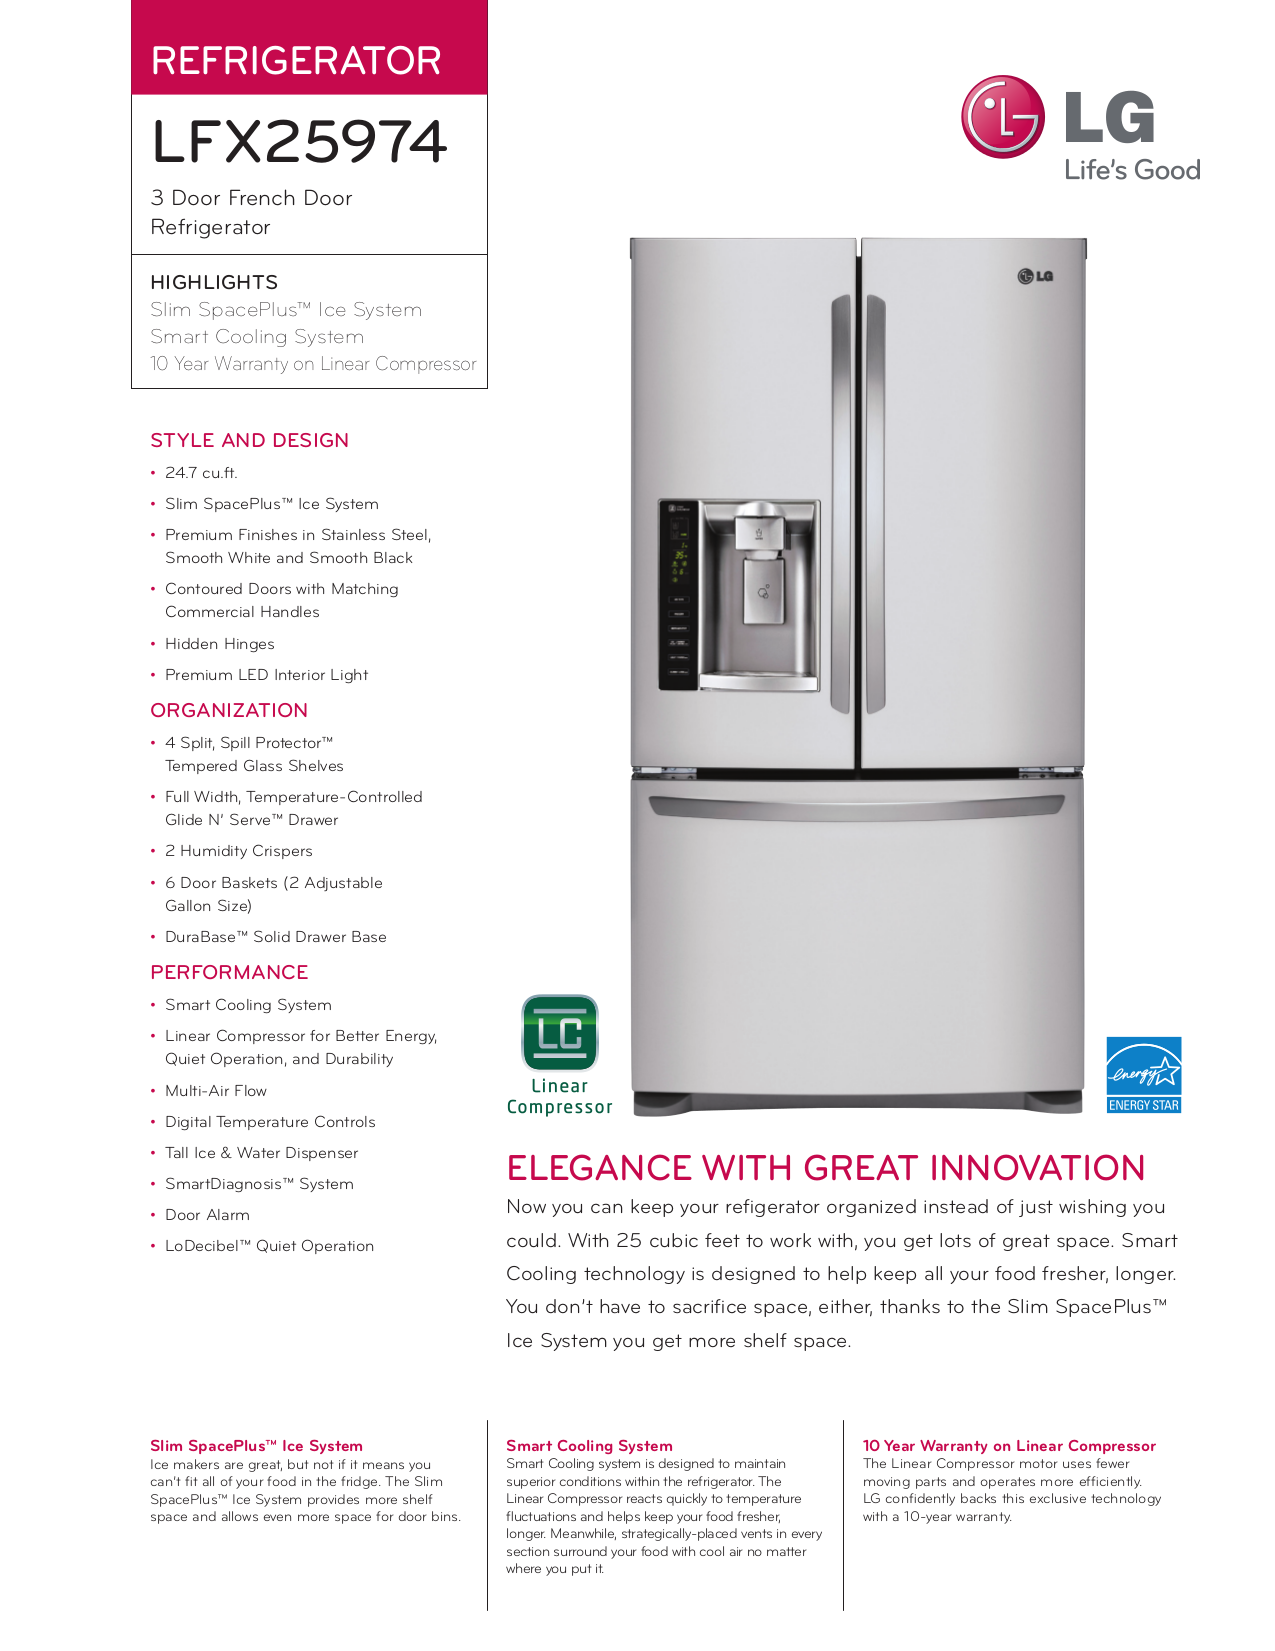 What are the optimal LG refrigerator settings?